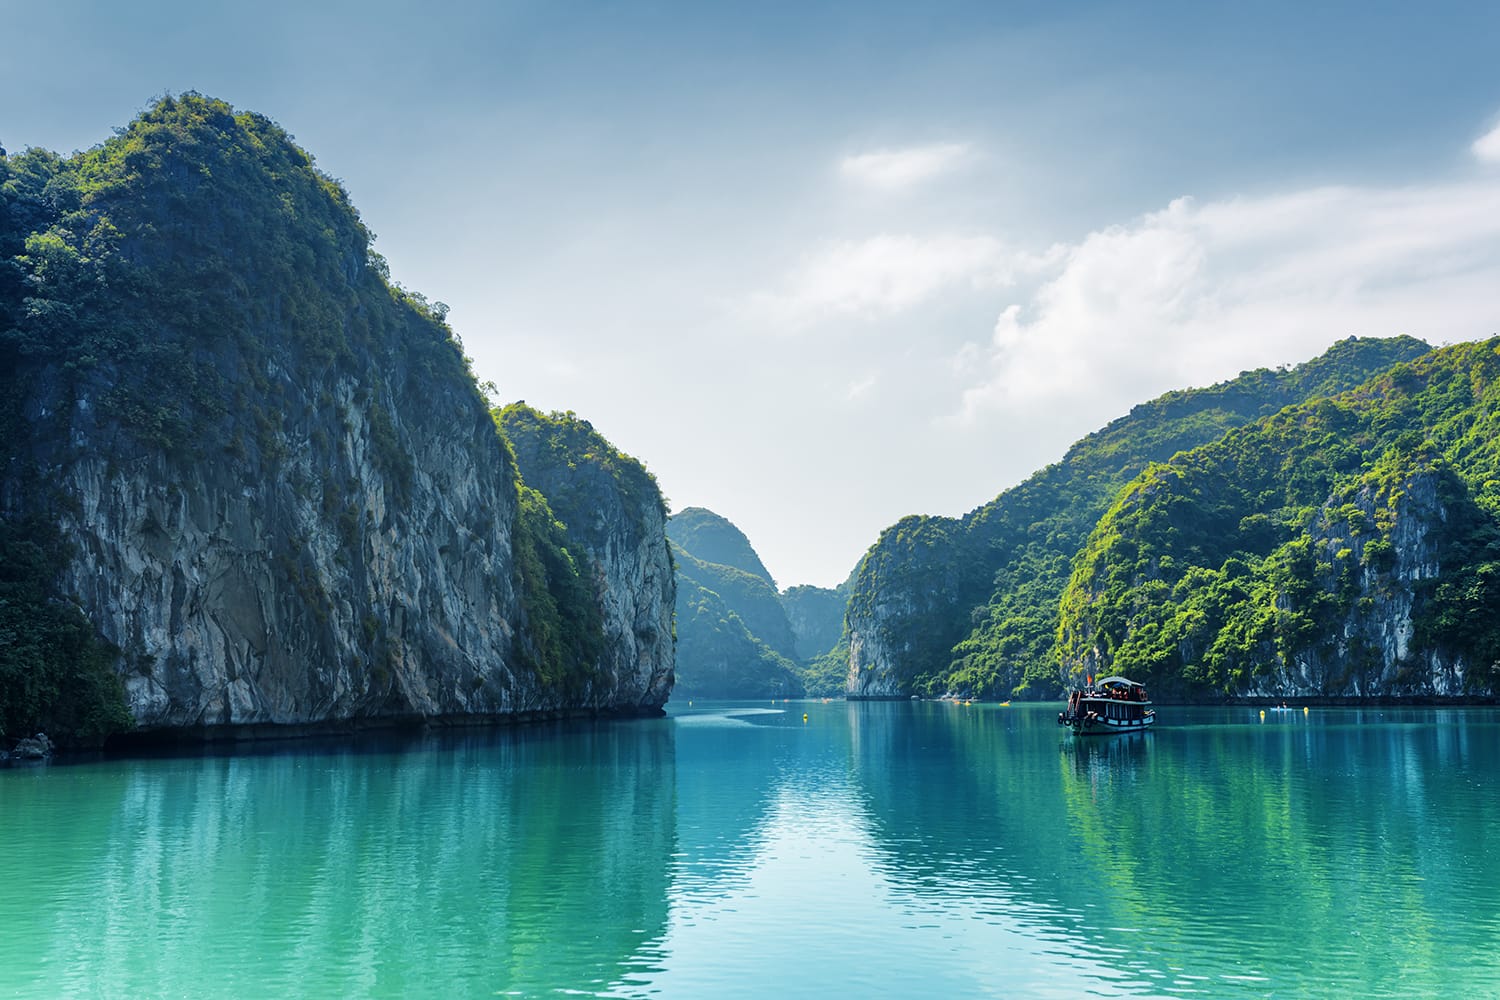 Beautiful view of lagoon in the Halong Bay (Descending Dragon Bay) at the Gulf of Tonkin of the South China Sea, Vietnam